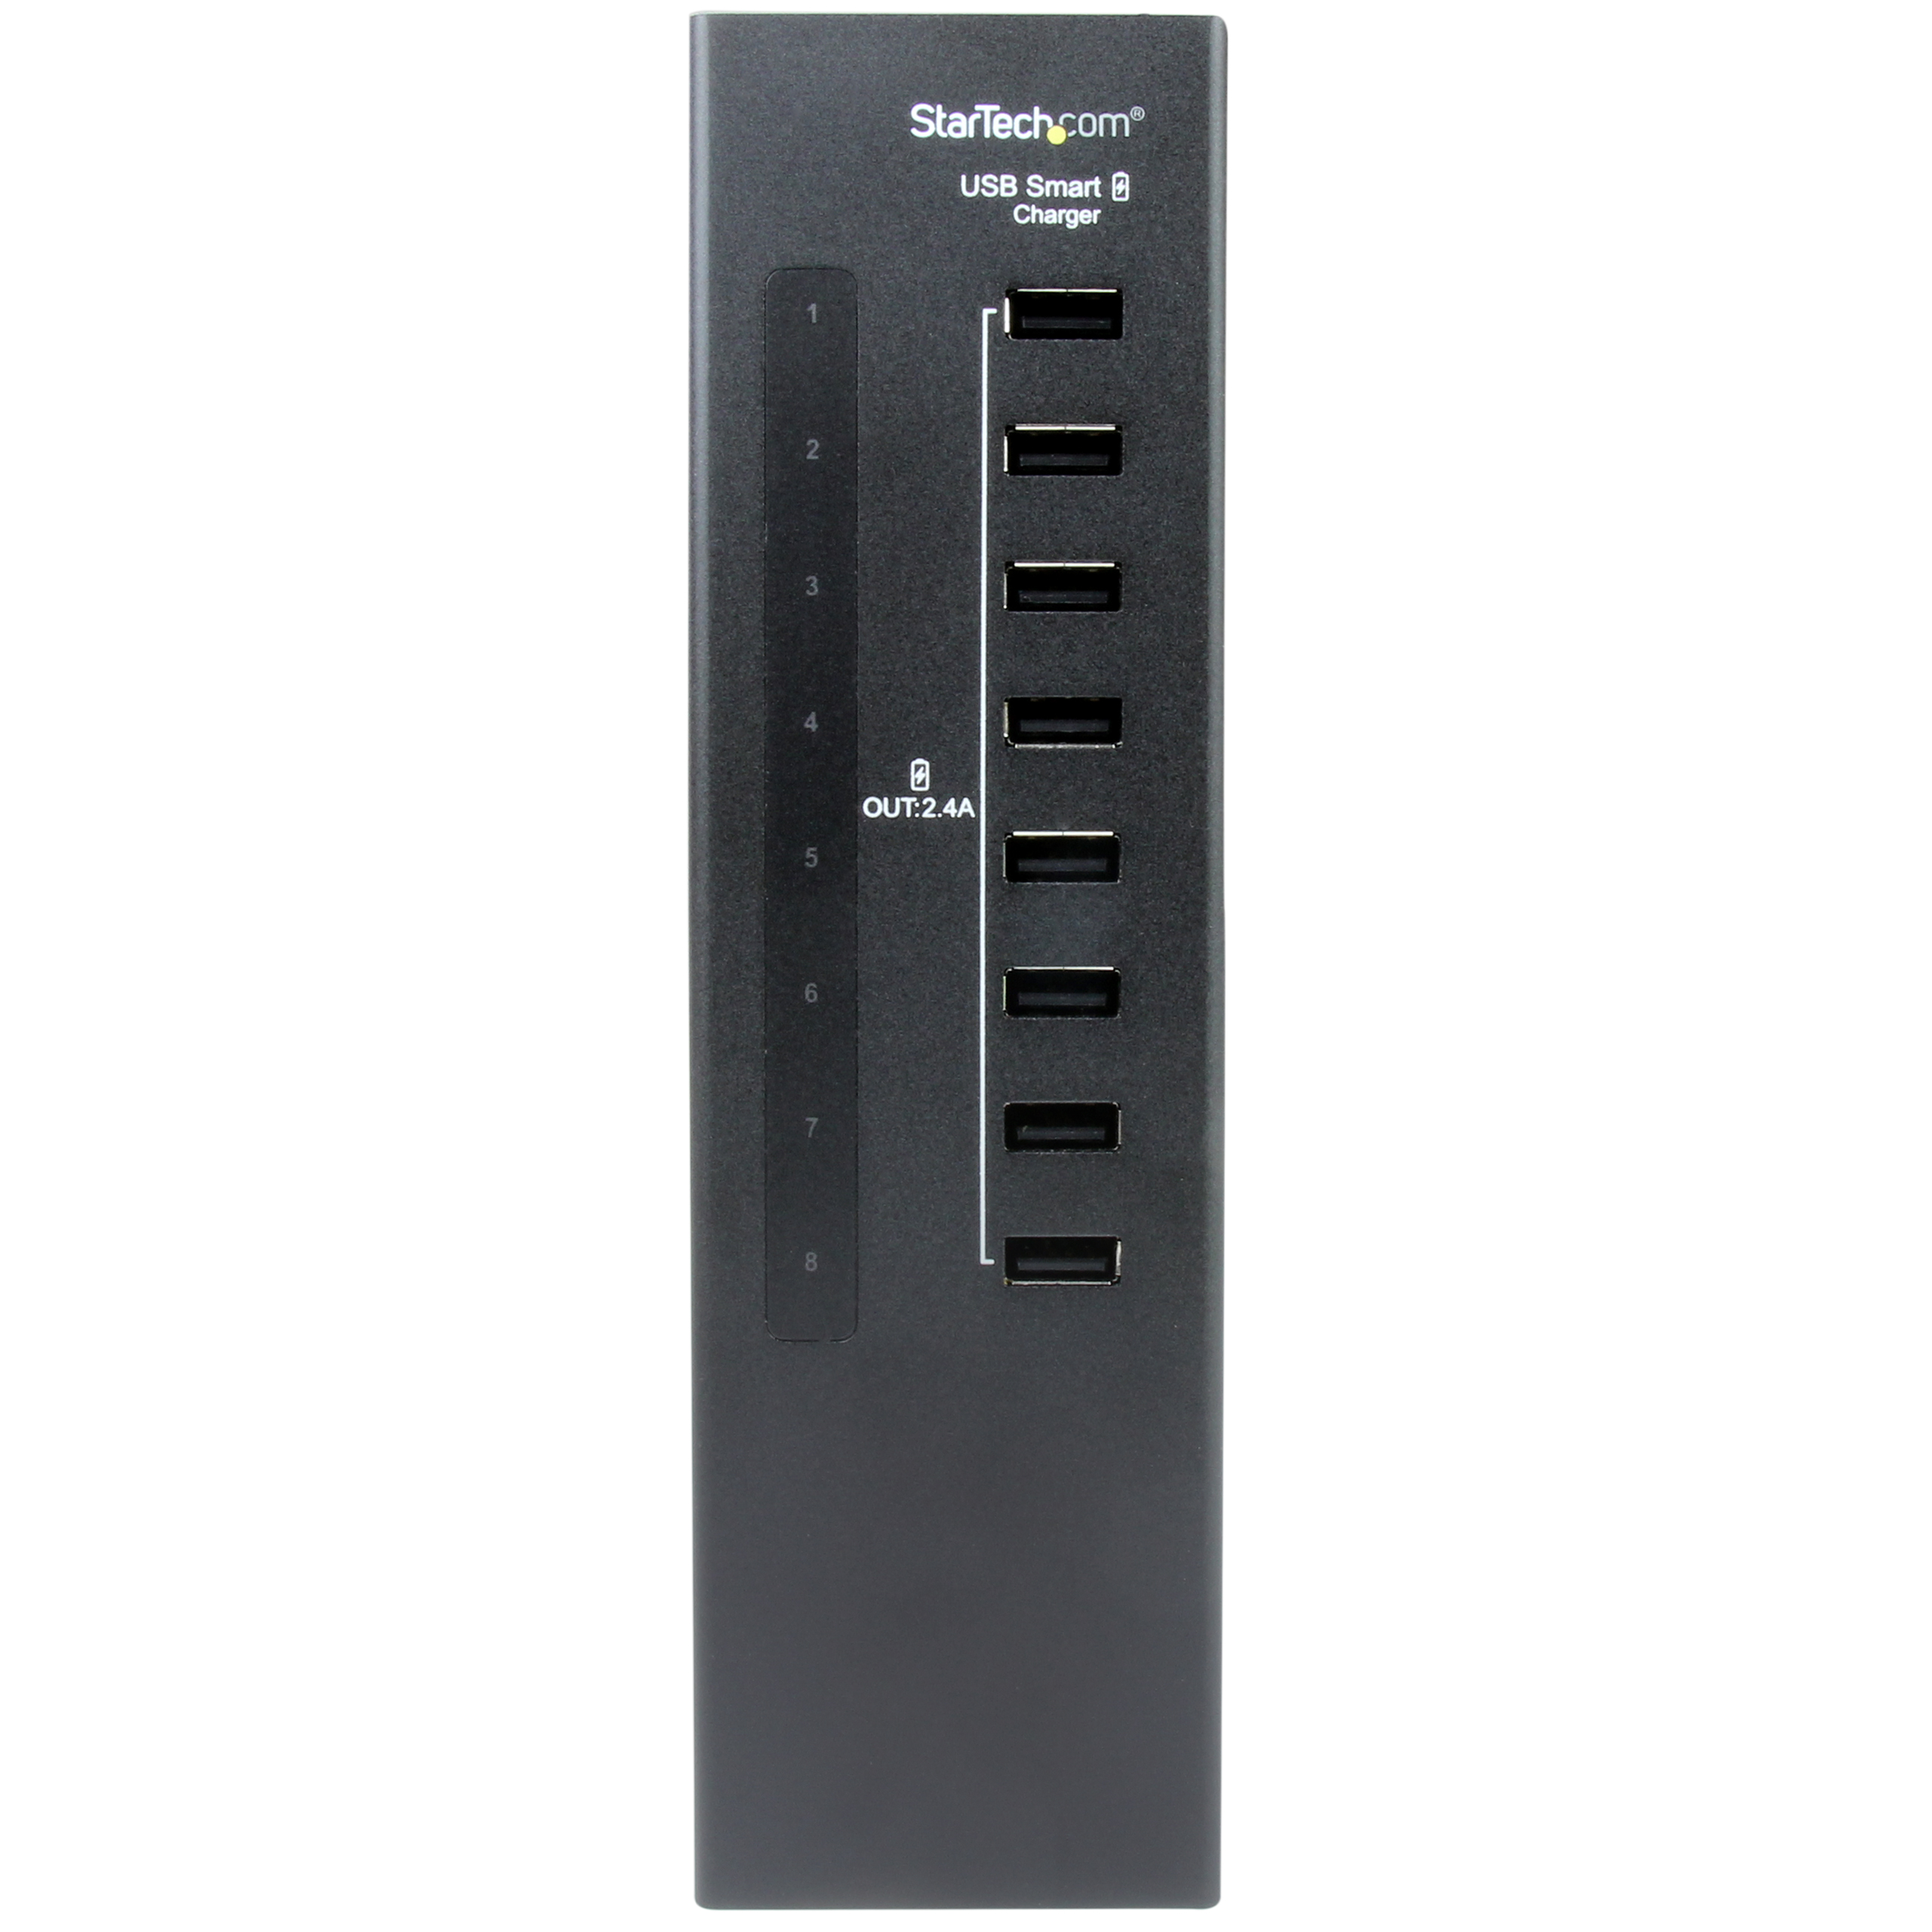 StarTech.com 8-Port Charging Station for USB Devices - 96W/19.2A - Dedicated Desktop Multi-Device USB Charging Station - image 4 of 4